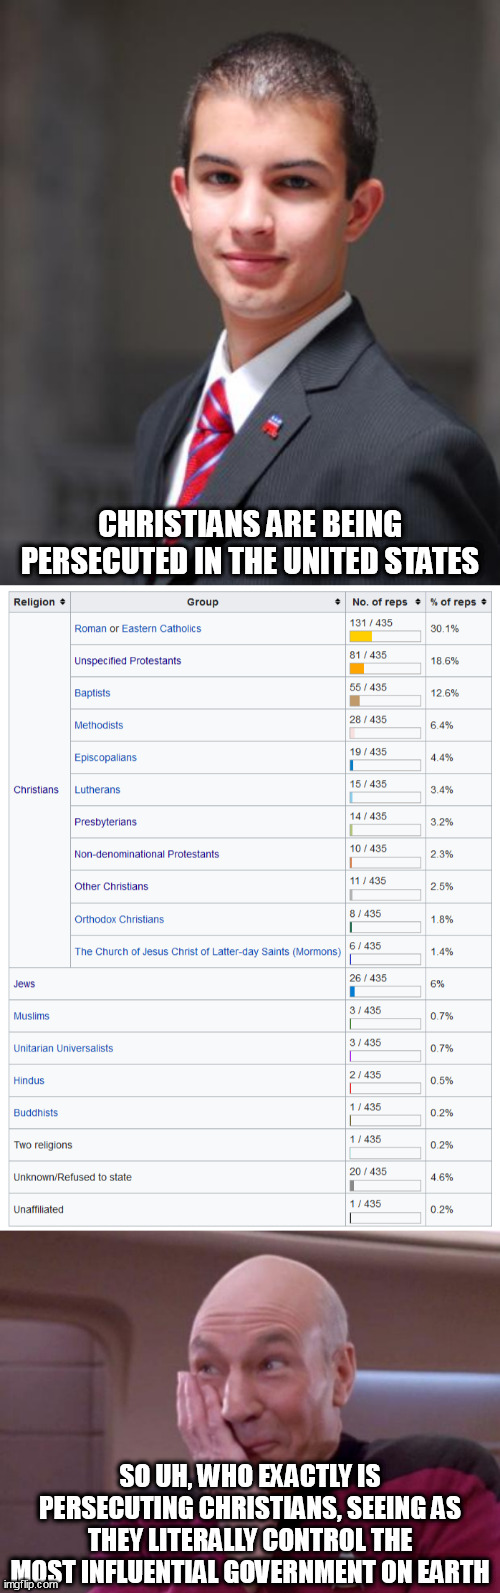 Persecution Not | CHRISTIANS ARE BEING PERSECUTED IN THE UNITED STATES; SO UH, WHO EXACTLY IS PERSECUTING CHRISTIANS, SEEING AS THEY LITERALLY CONTROL THE MOST INFLUENTIAL GOVERNMENT ON EARTH | image tagged in college conservative,picard smirk,persecution,united states,usa,christians | made w/ Imgflip meme maker